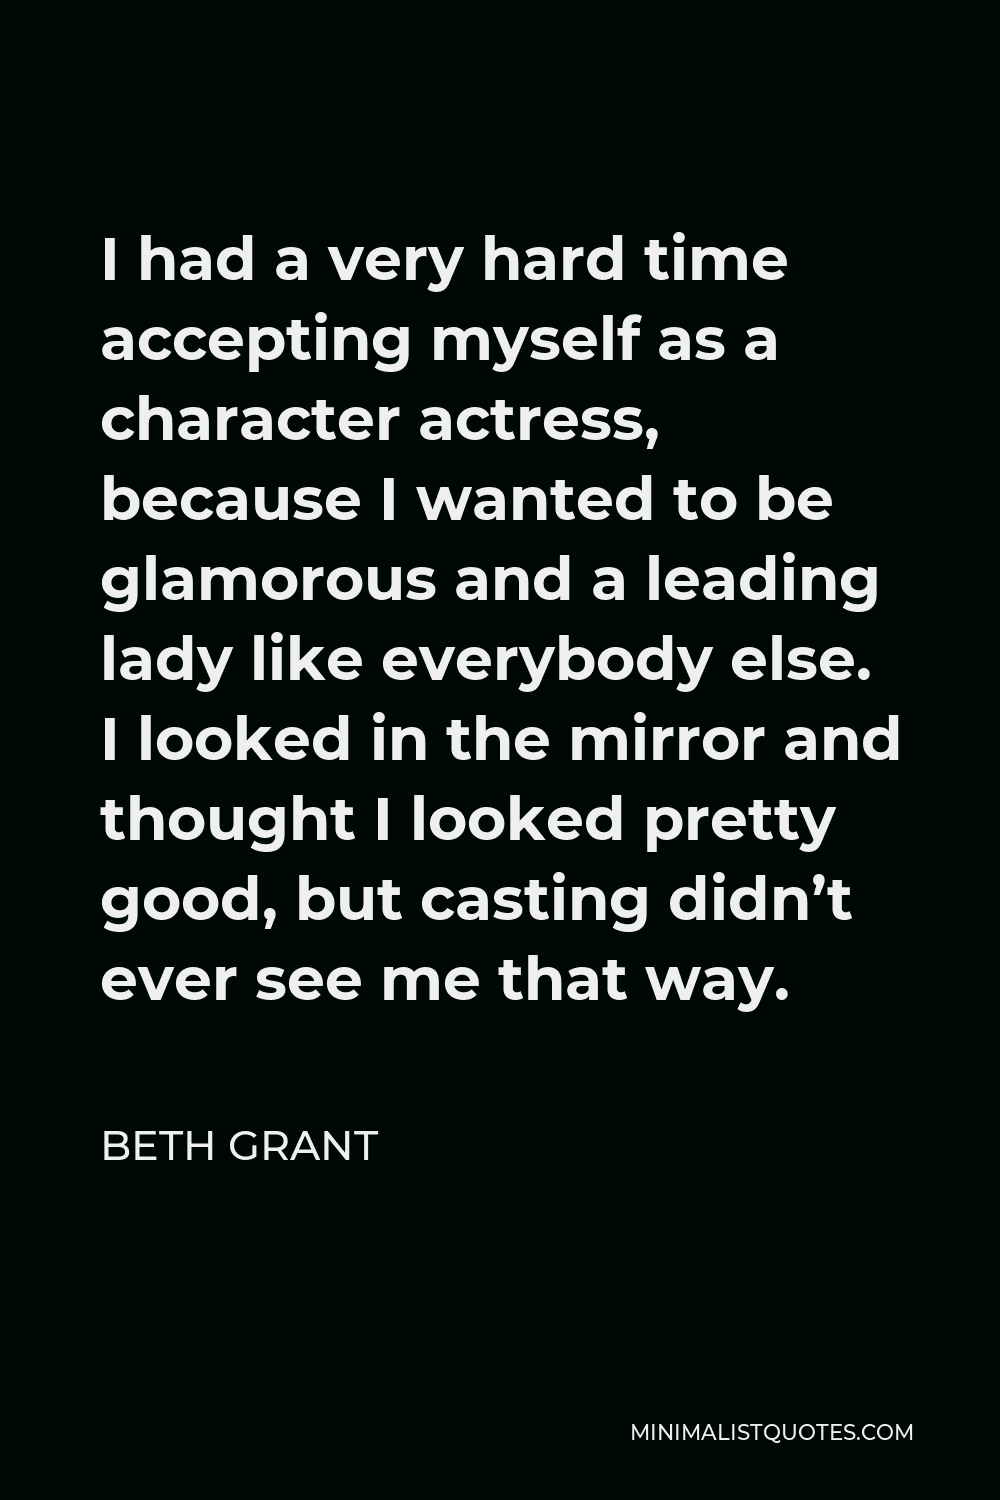 Beth Grant Quote - I had a very hard time accepting myself as a character actress, because I wanted to be glamorous and a leading lady like everybody else. I looked in the mirror and thought I looked pretty good, but casting didn’t ever see me that way.